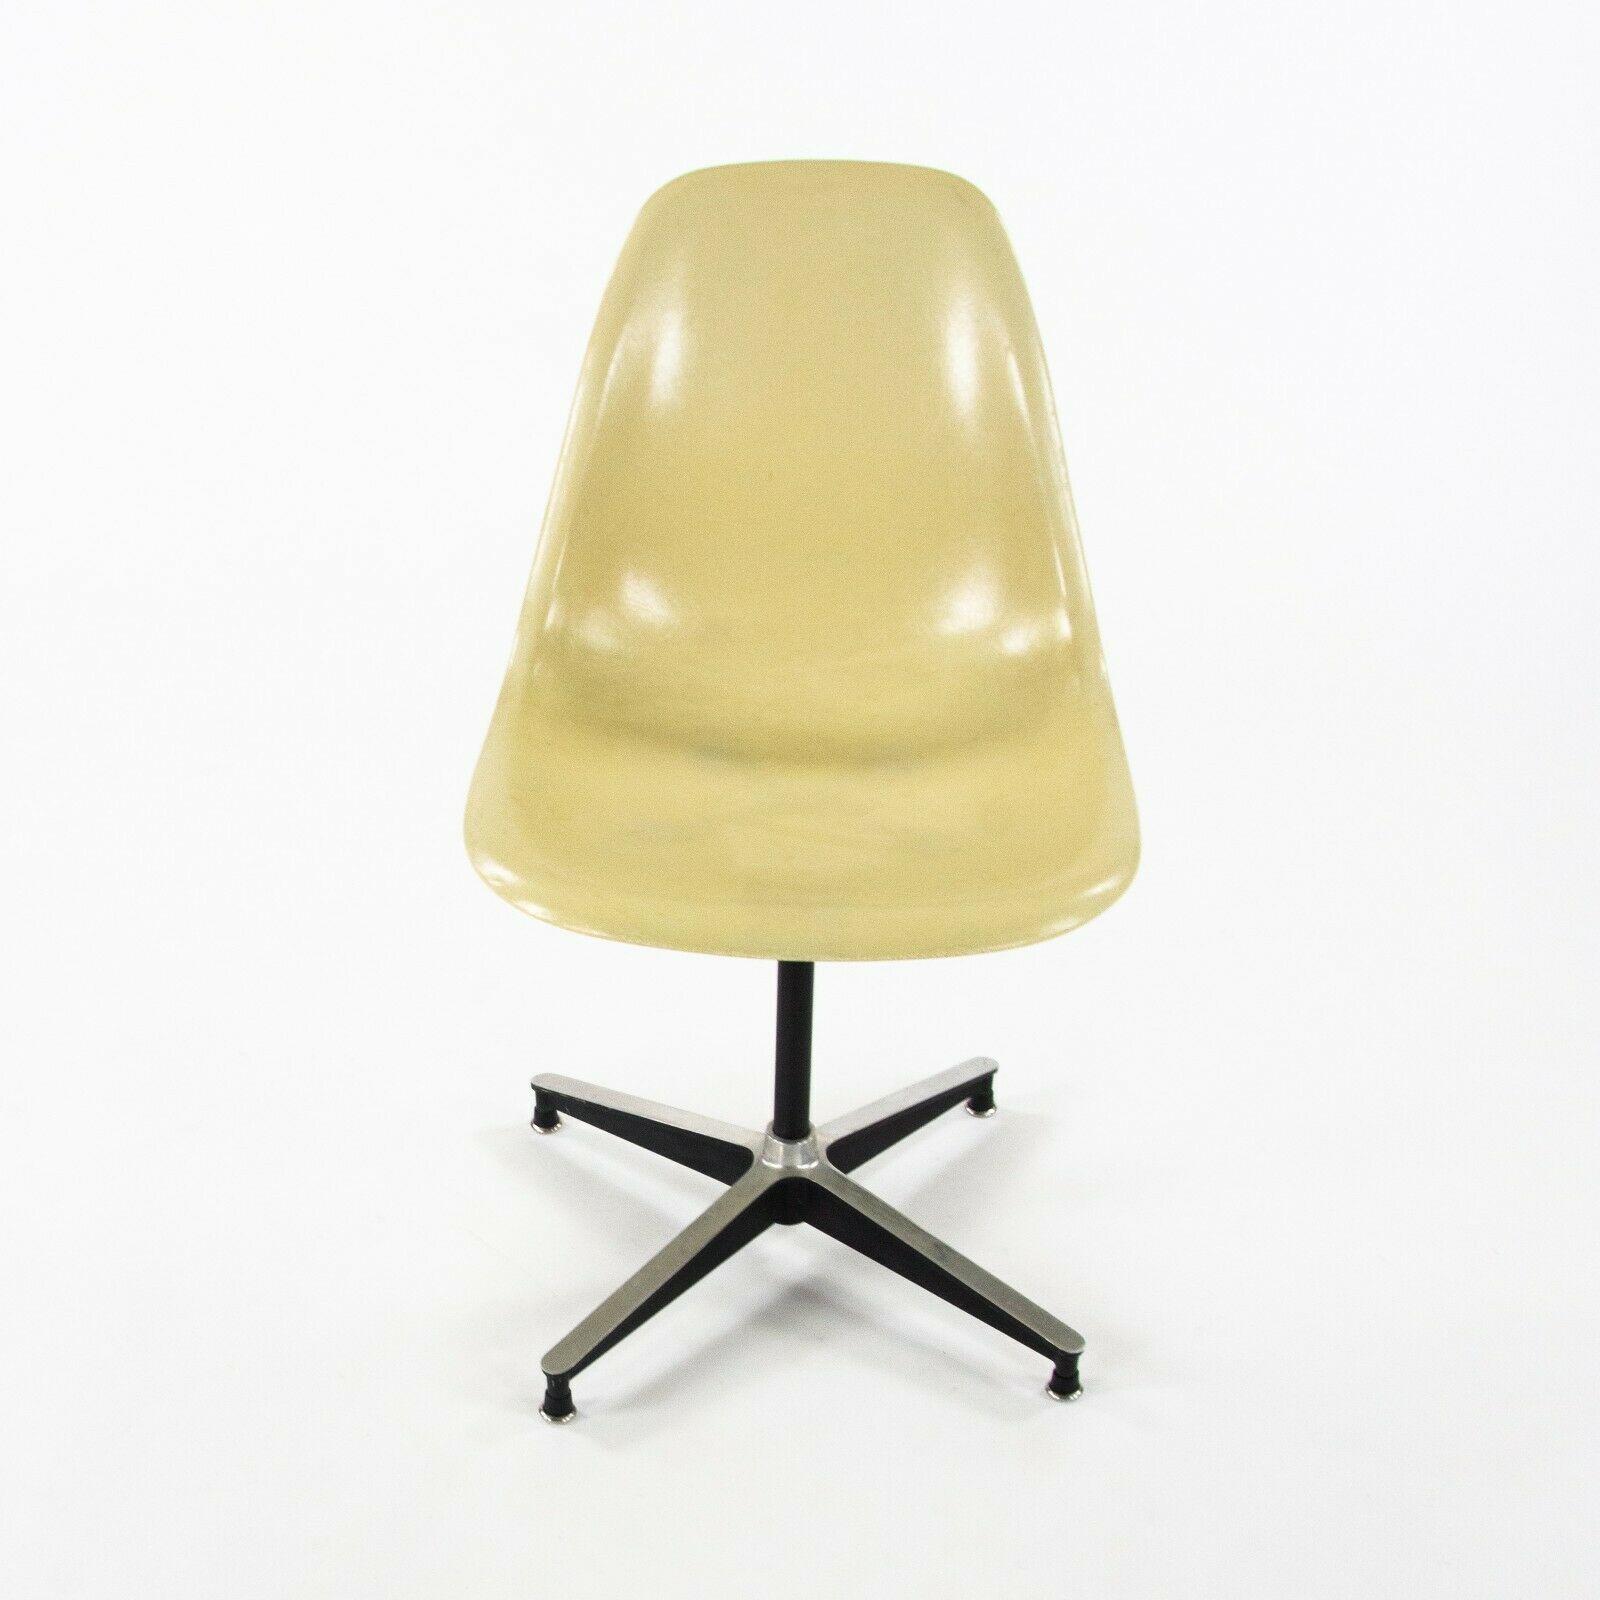 SOLD 1954 Herman Miller Eames PSC Side Shell Chair with Rare 671 Base and Ivory Shell